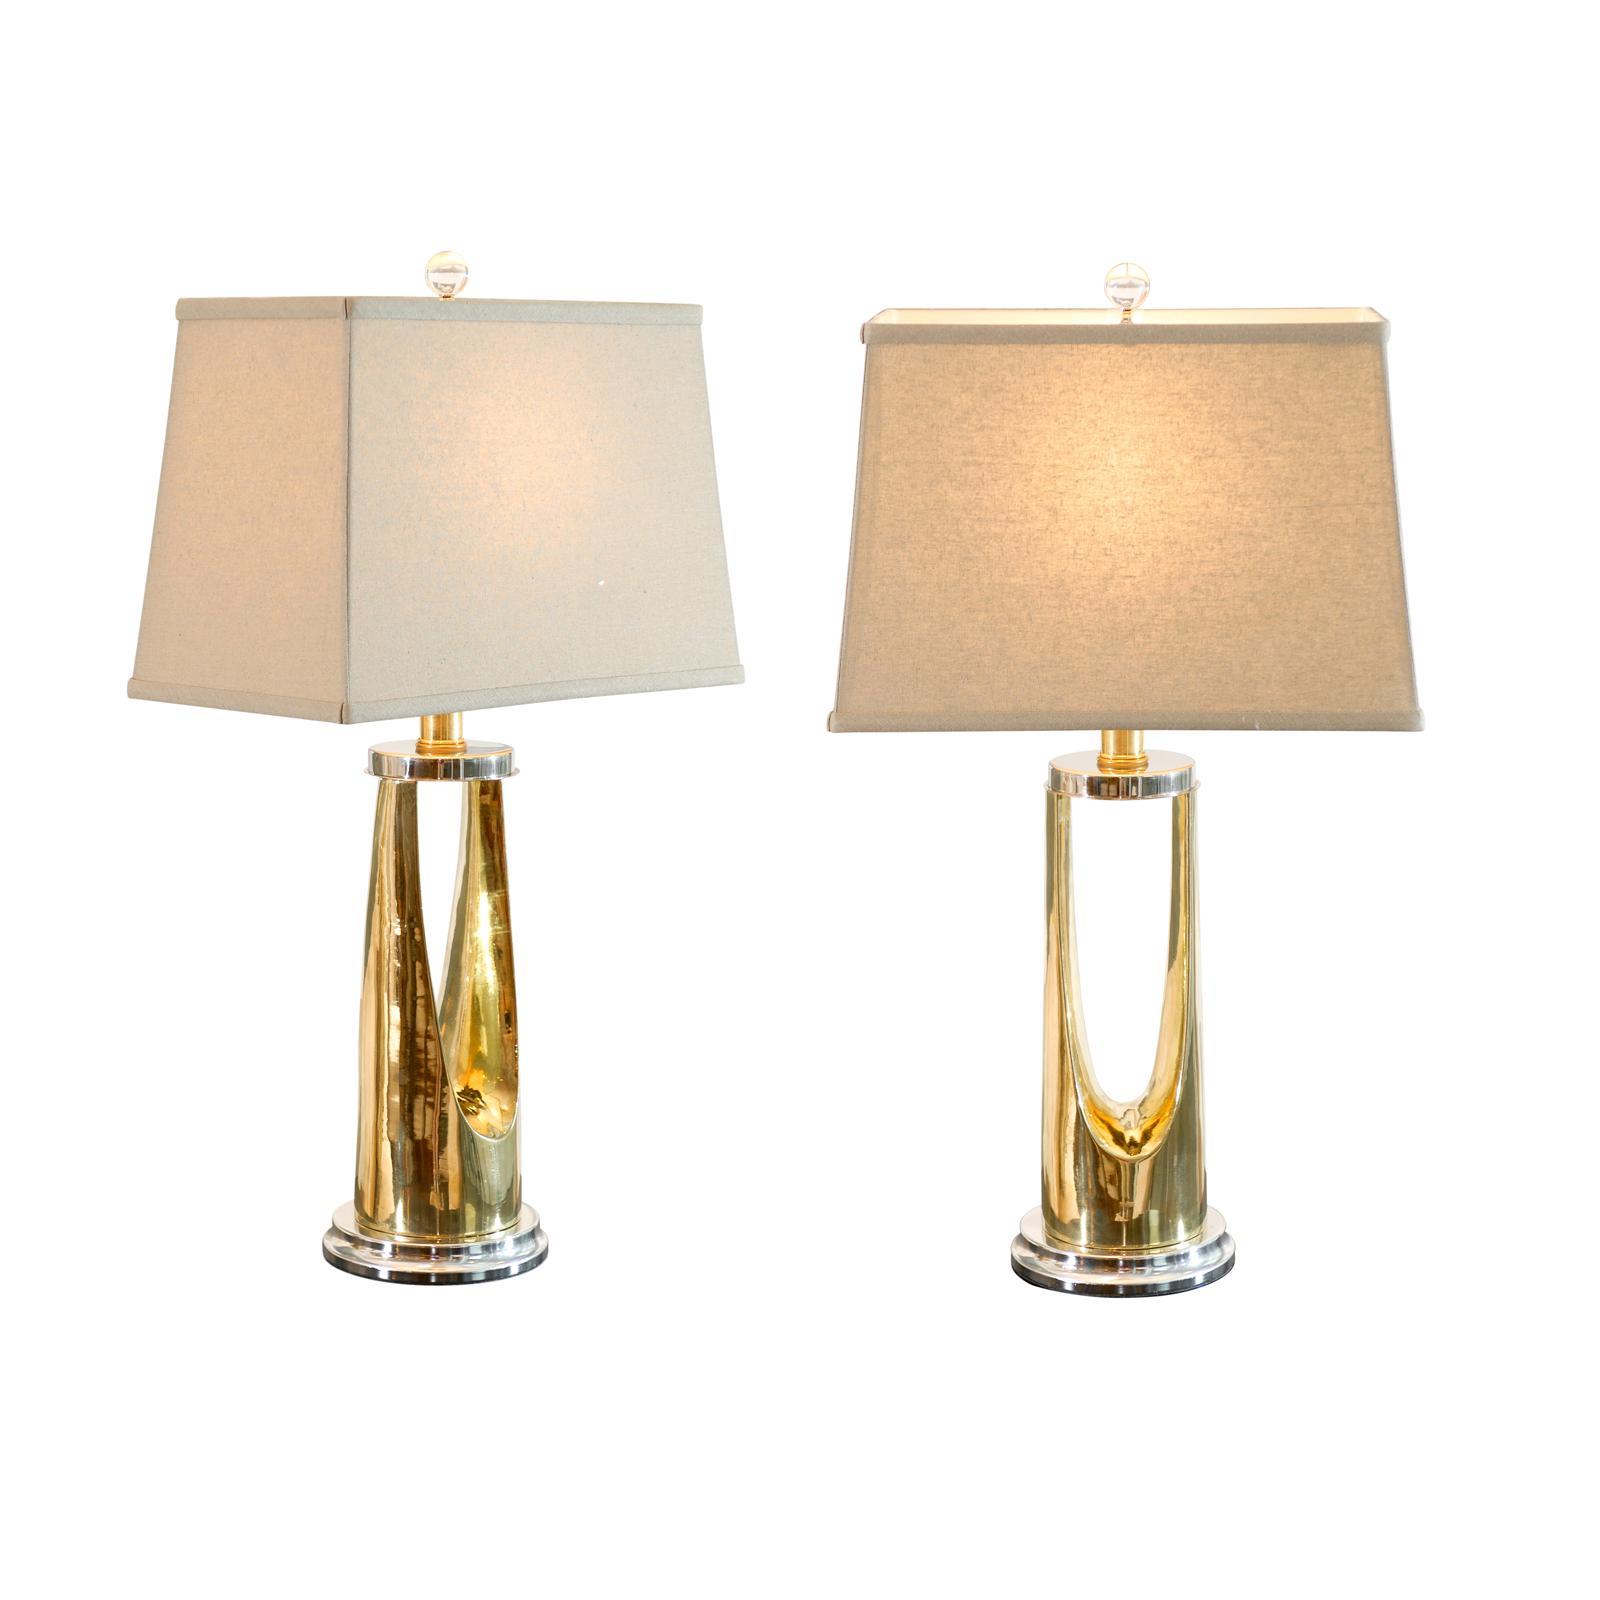 Fabulous Pair of Modern Lamps in Nickel and Brass